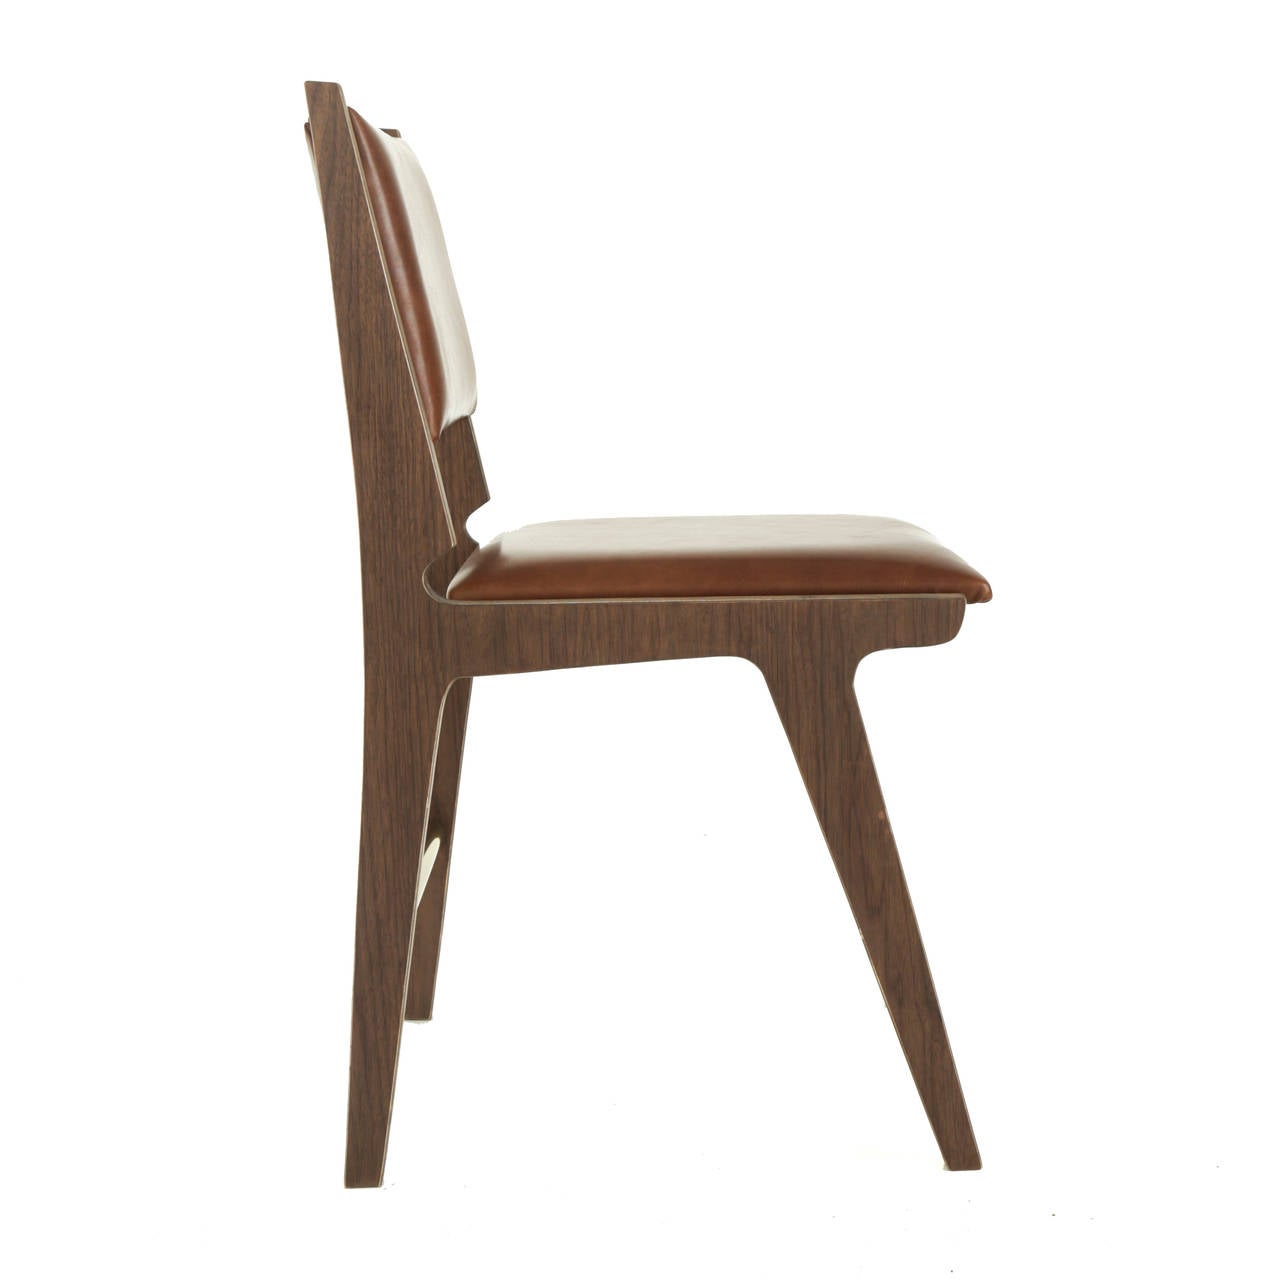 A sculptural dining chair in Baltic Birch plywood available for custom order by Thomas Hayes Studio inspired by the designs of Martin Eisler with comfortable upholstered seat and floating back. The chairs have a beautiful detail at the back of the